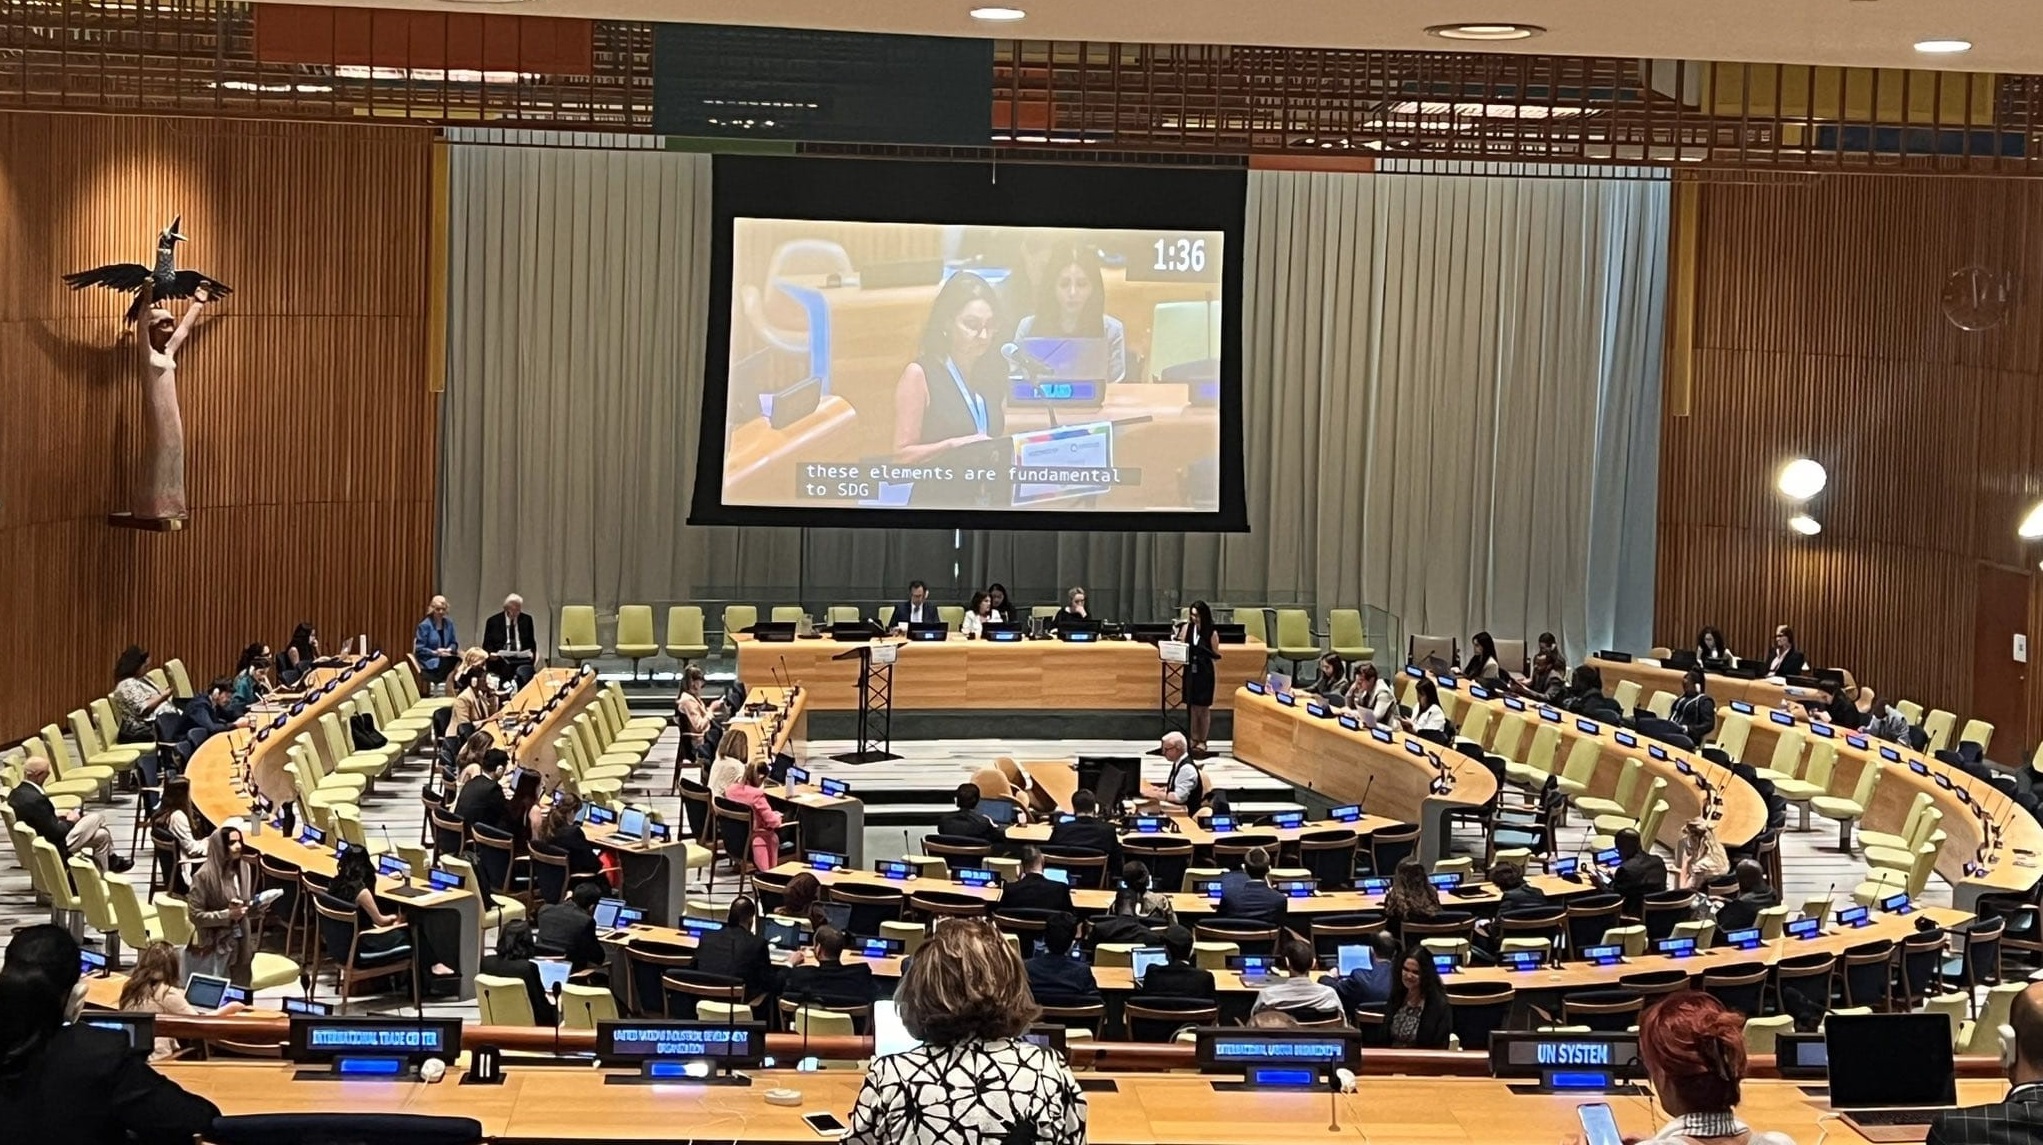 Statement delivered by Annika Silva-Leander, Permanent Observer for International IDEA to the UN. Location: Trusteeship Council Chamber, UNHQ, New York